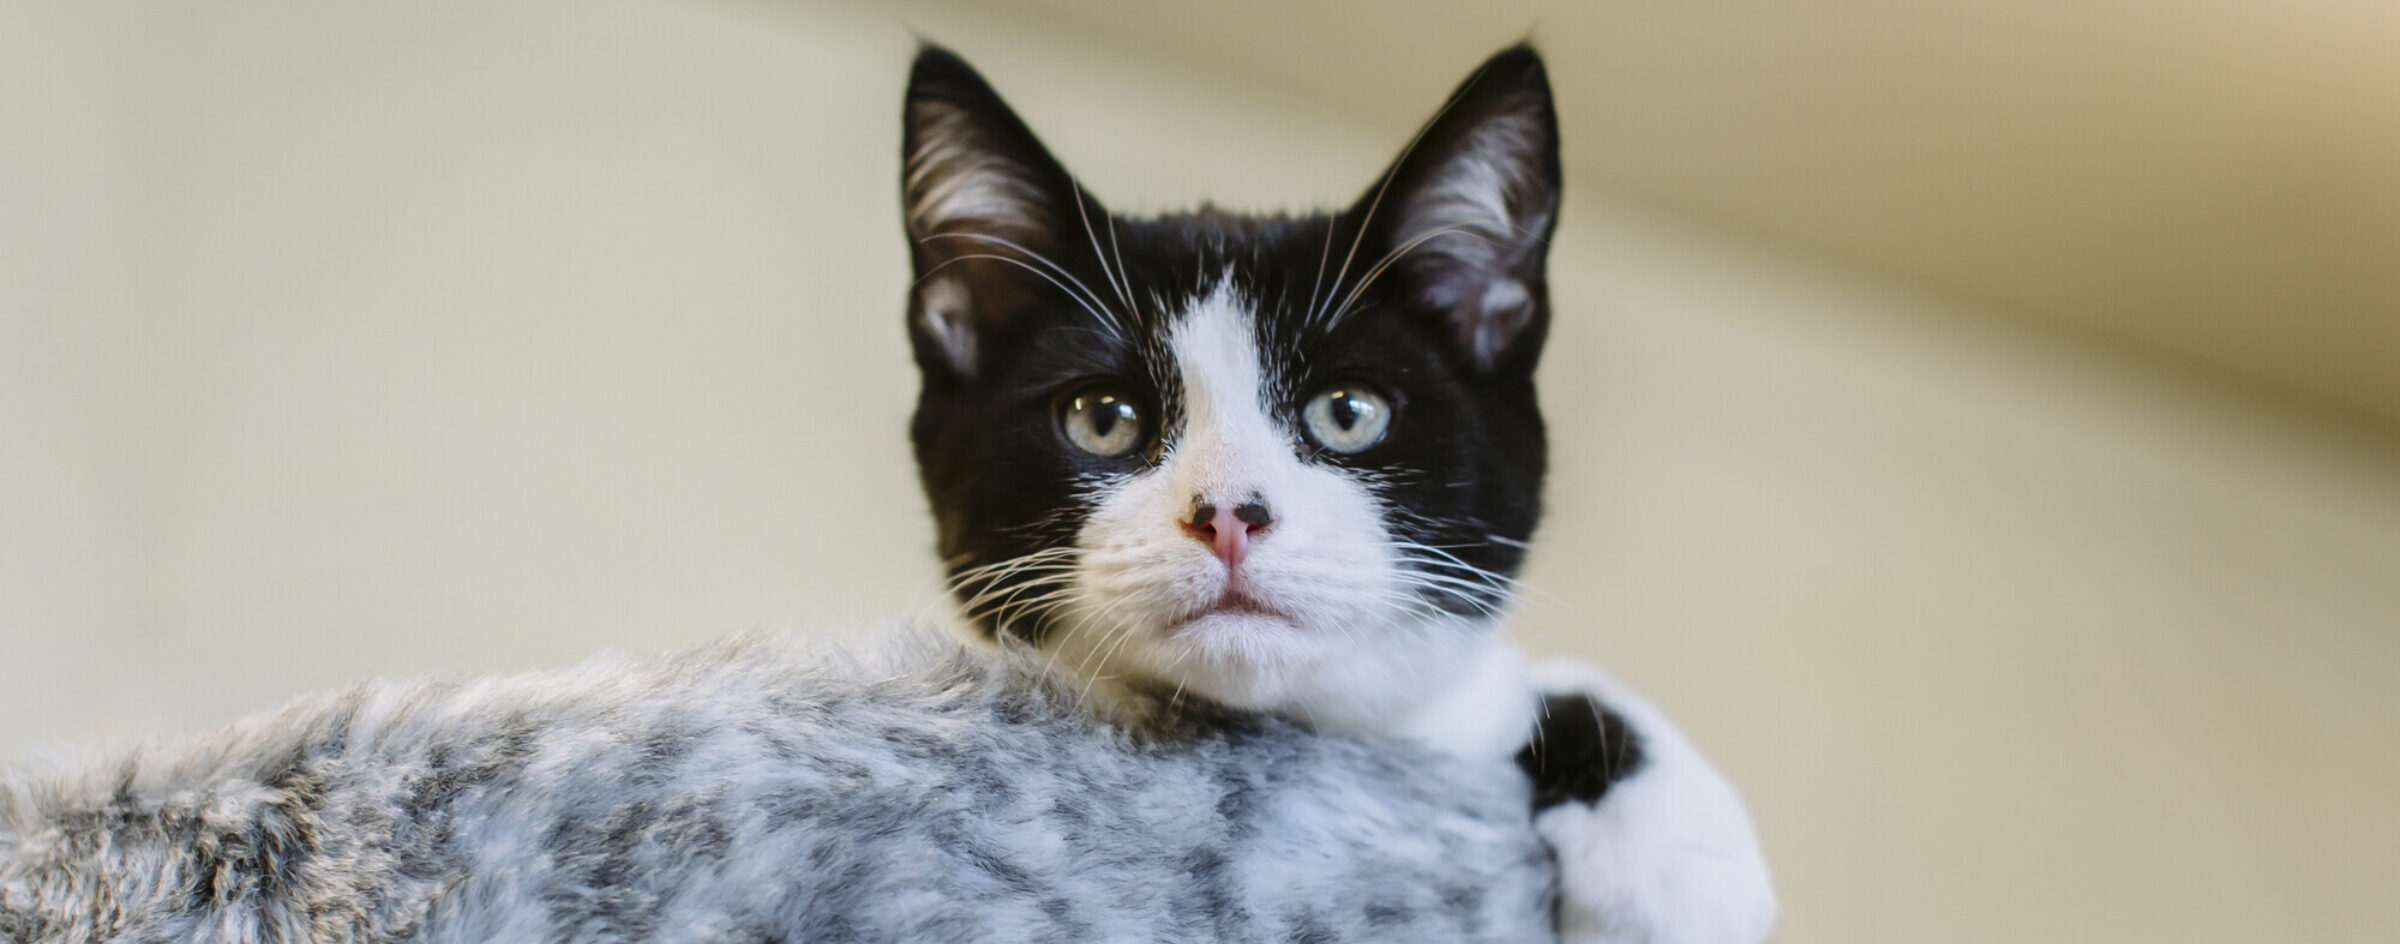 Black and white kitten looking at camera